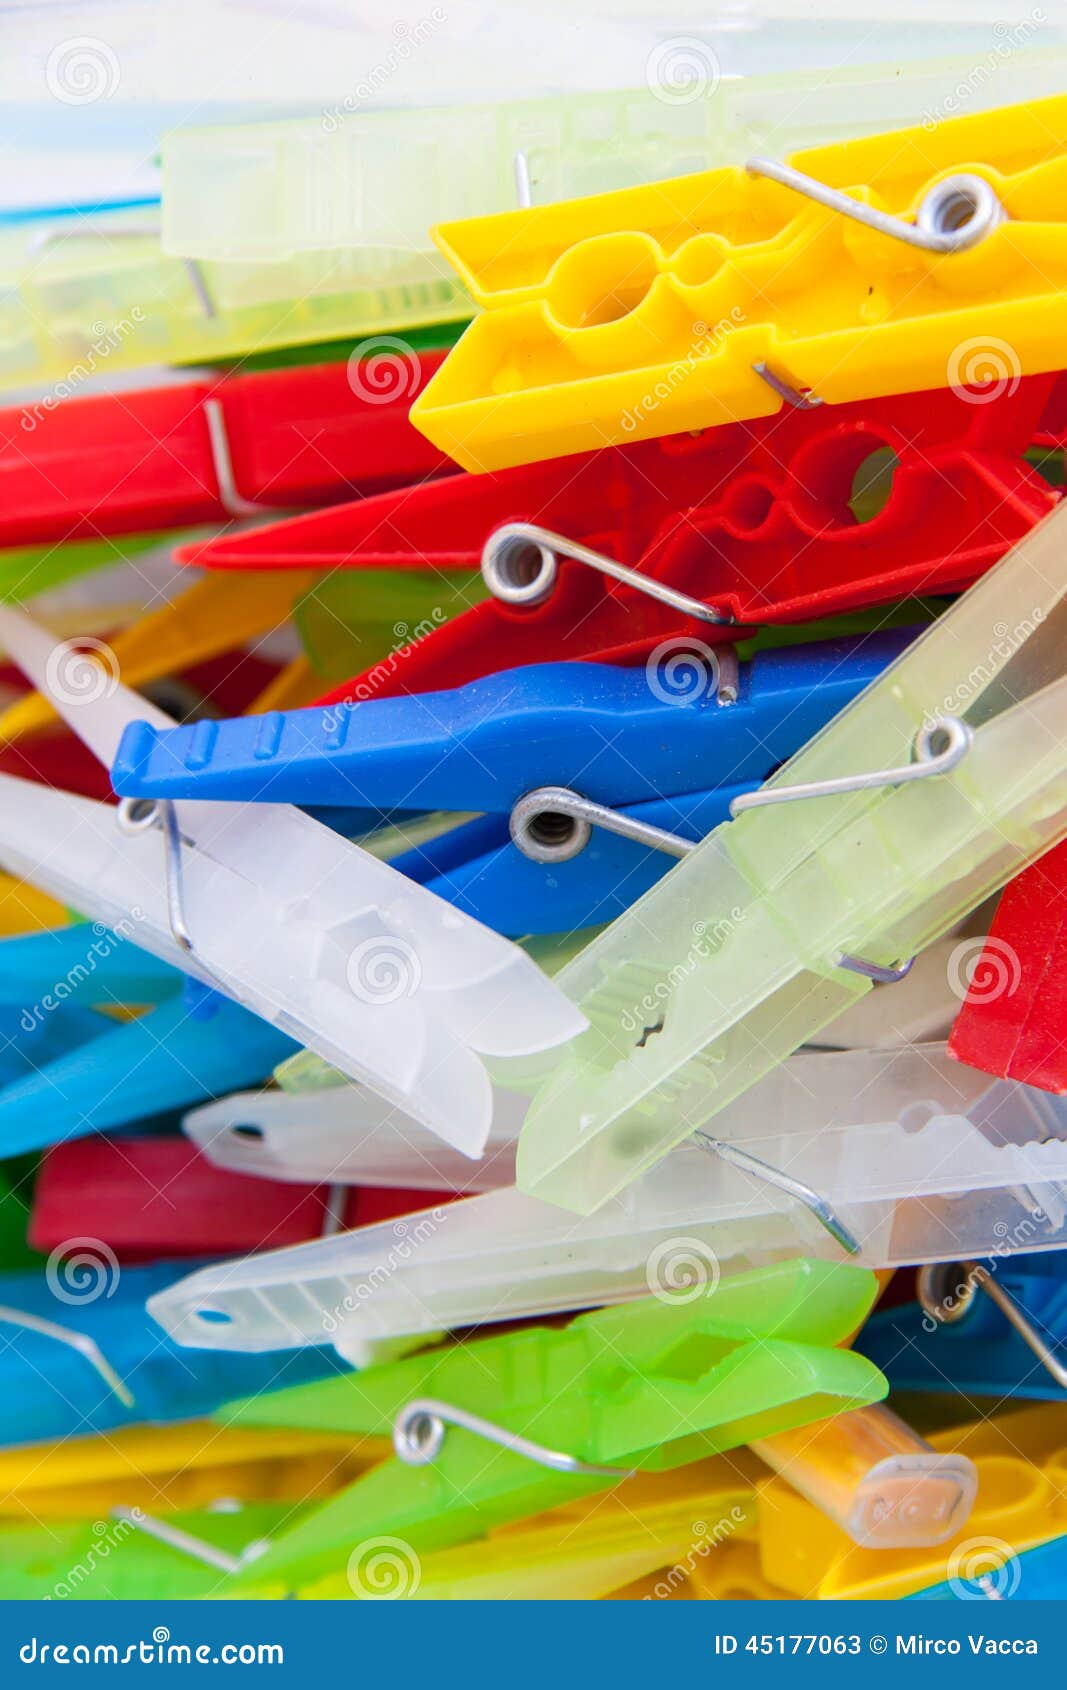 Clothe pins stock image. Image of clothe, objects, group - 45177063